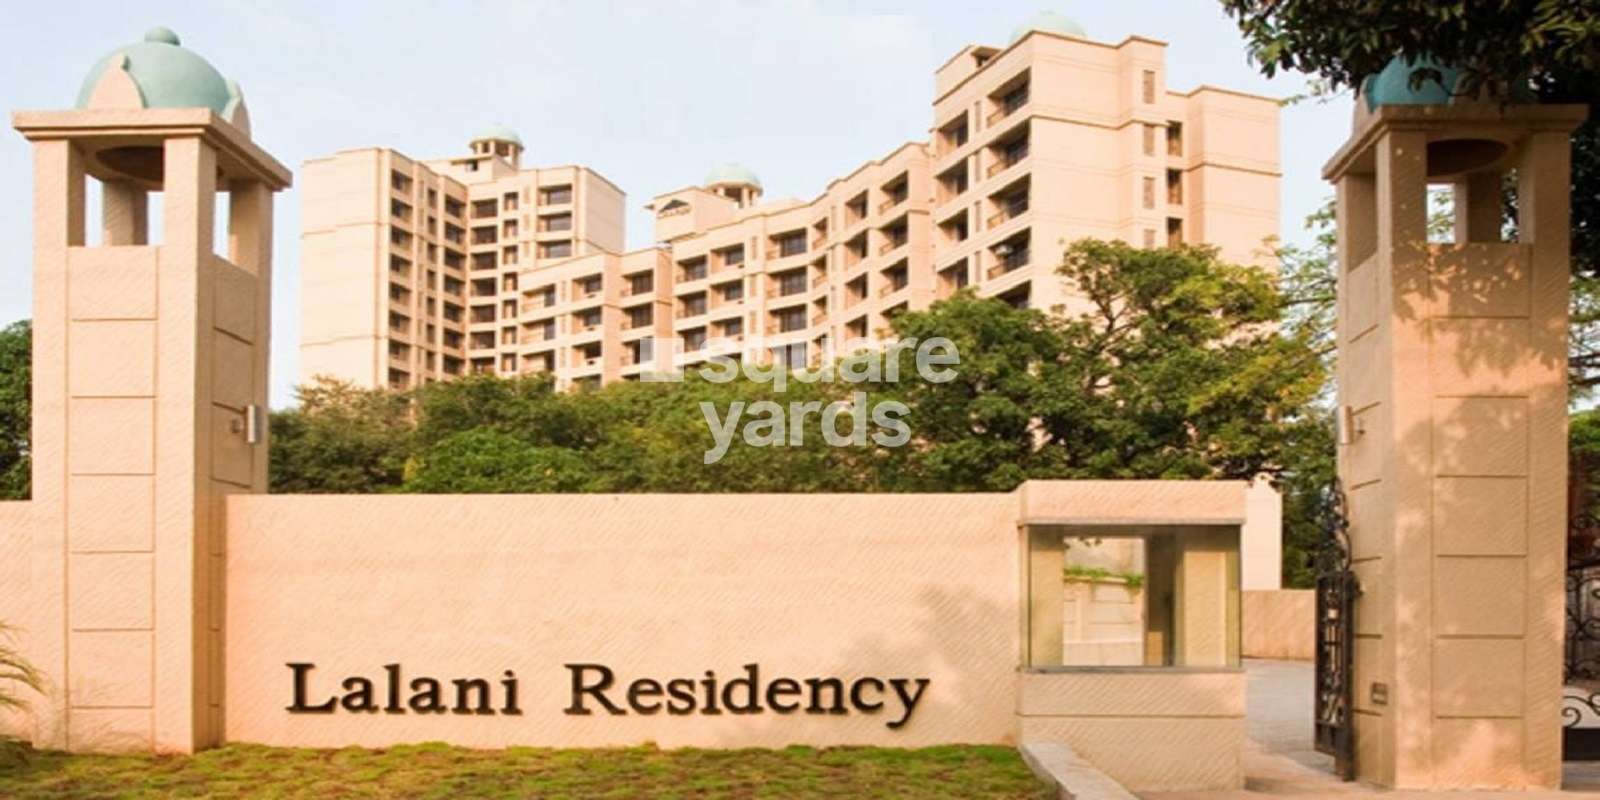 Lalani Residency Cover Image